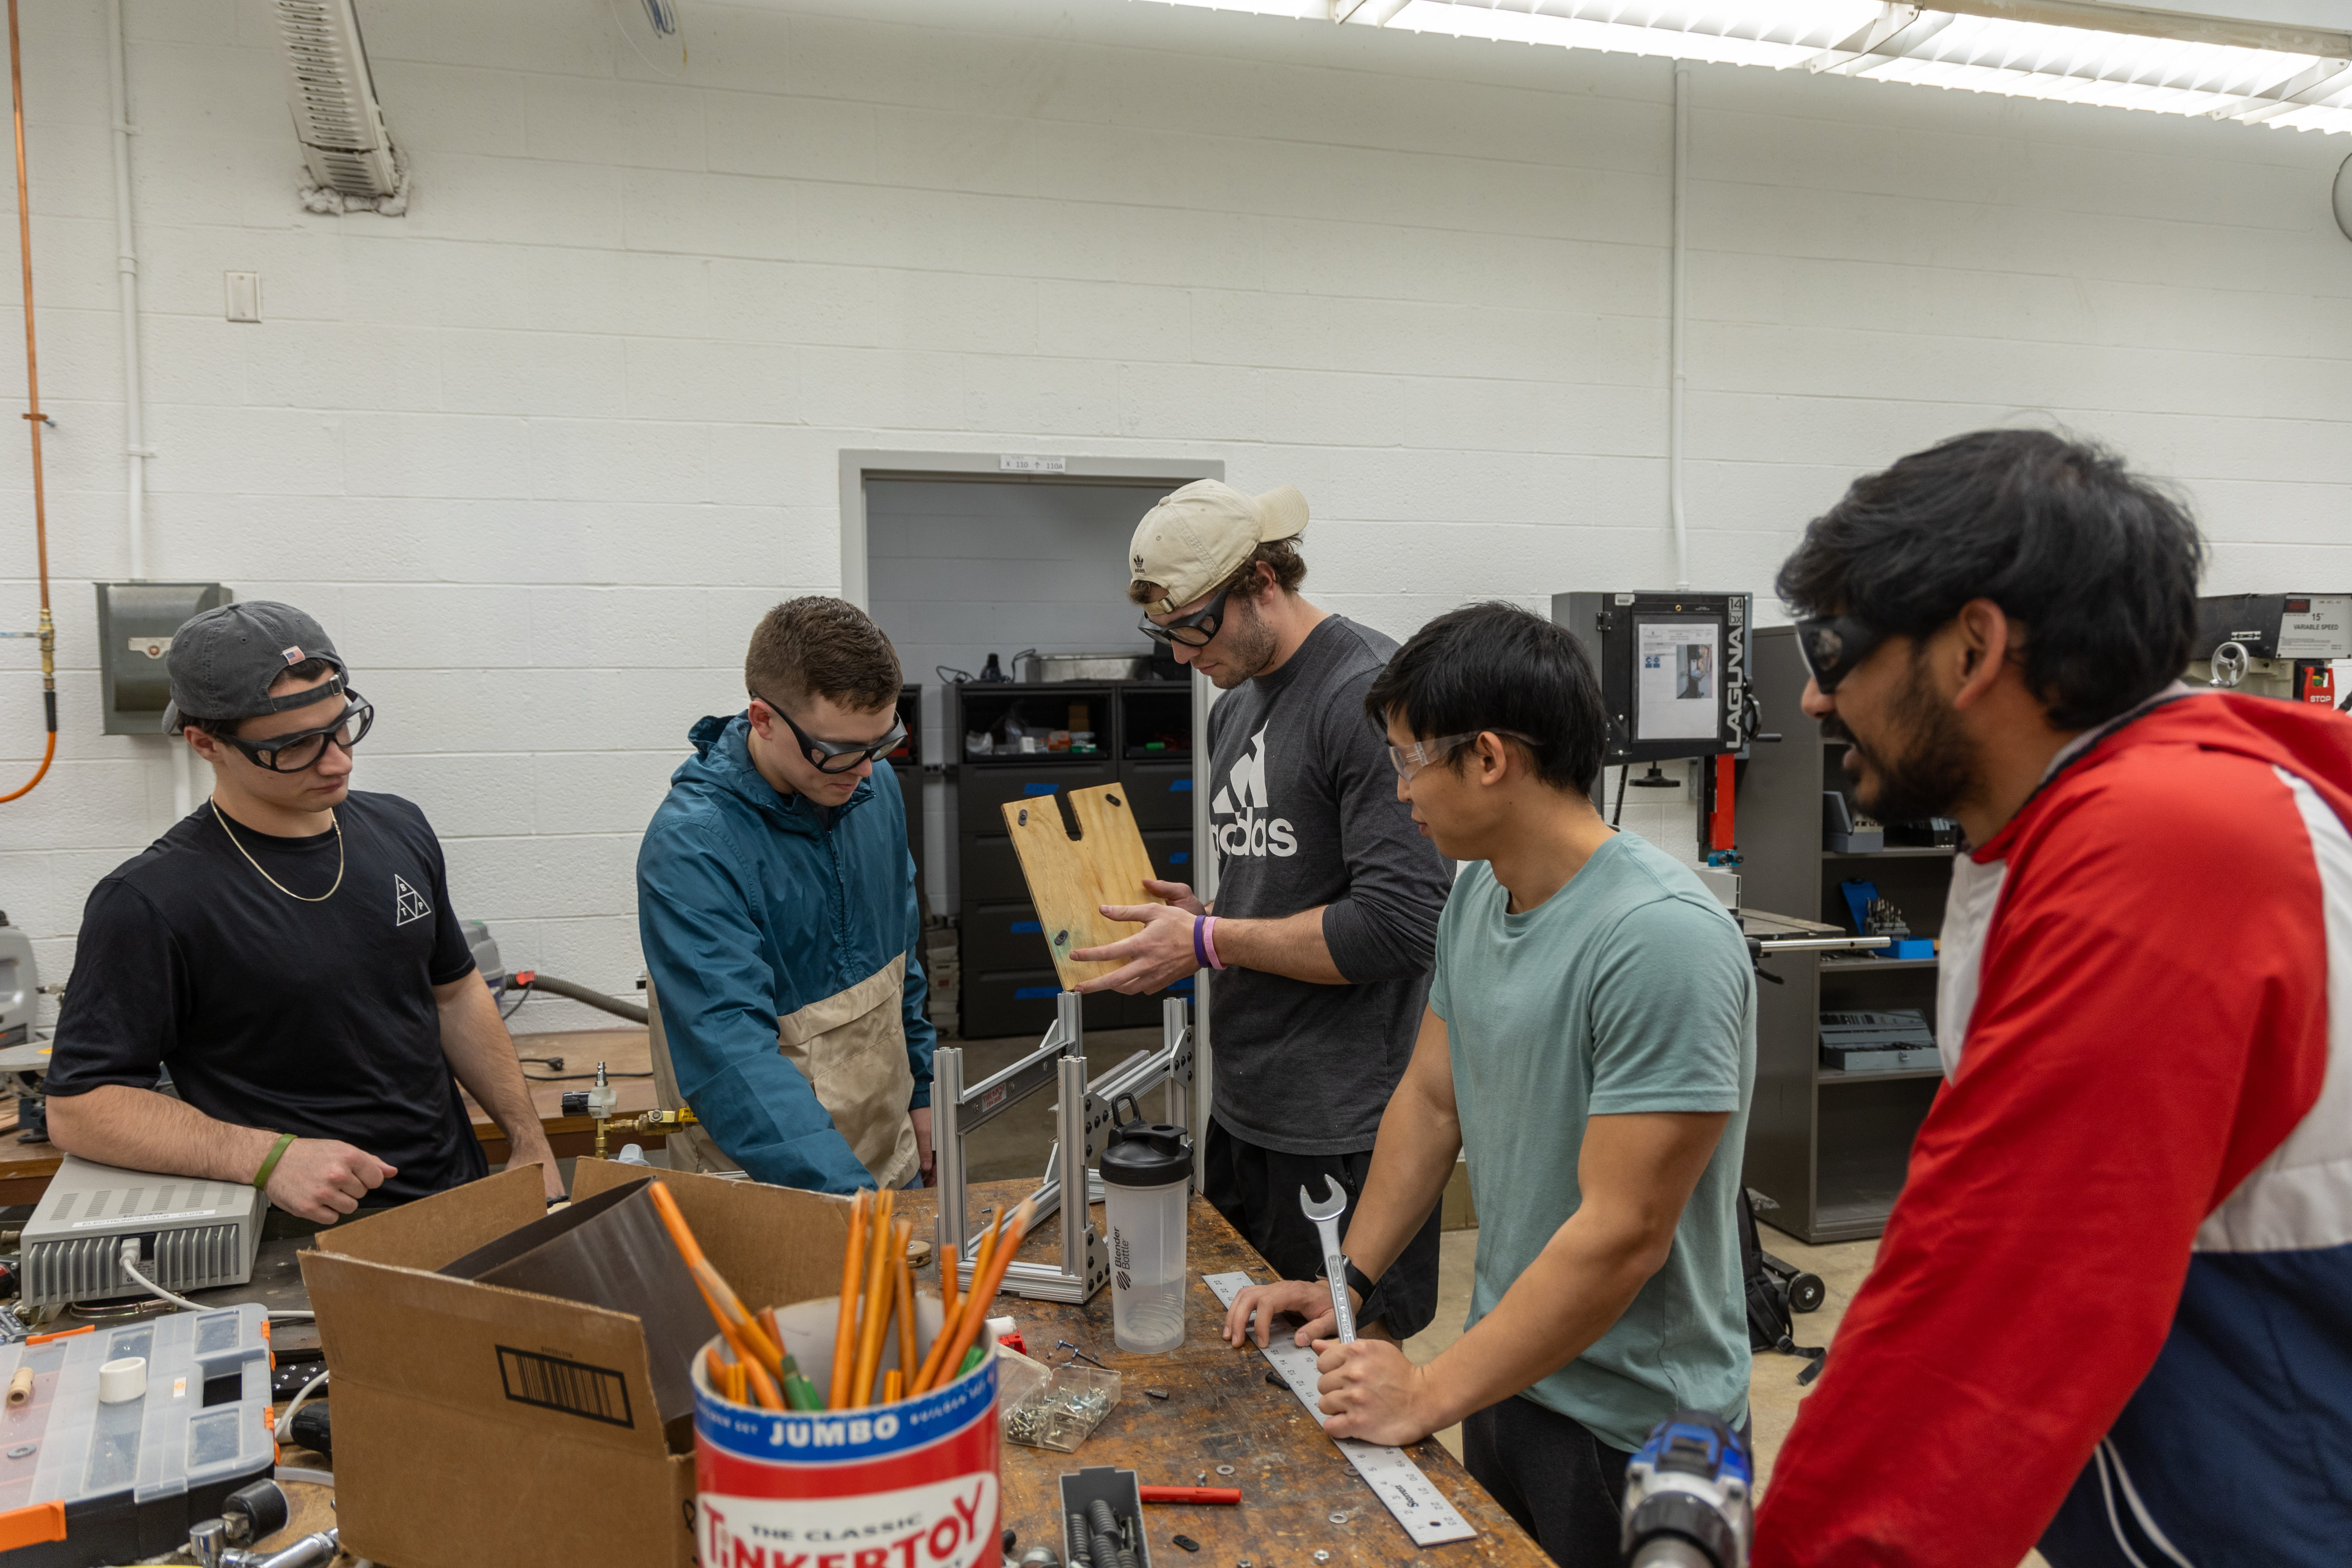 Fourth-years Matt Milanese, Owen Brown, Noah Balis, Alex Chou and Nora Patel working on a project in one of the Makerspace classrooms at Bolz Hall. Credit: Caleb Blake | Photo Editor